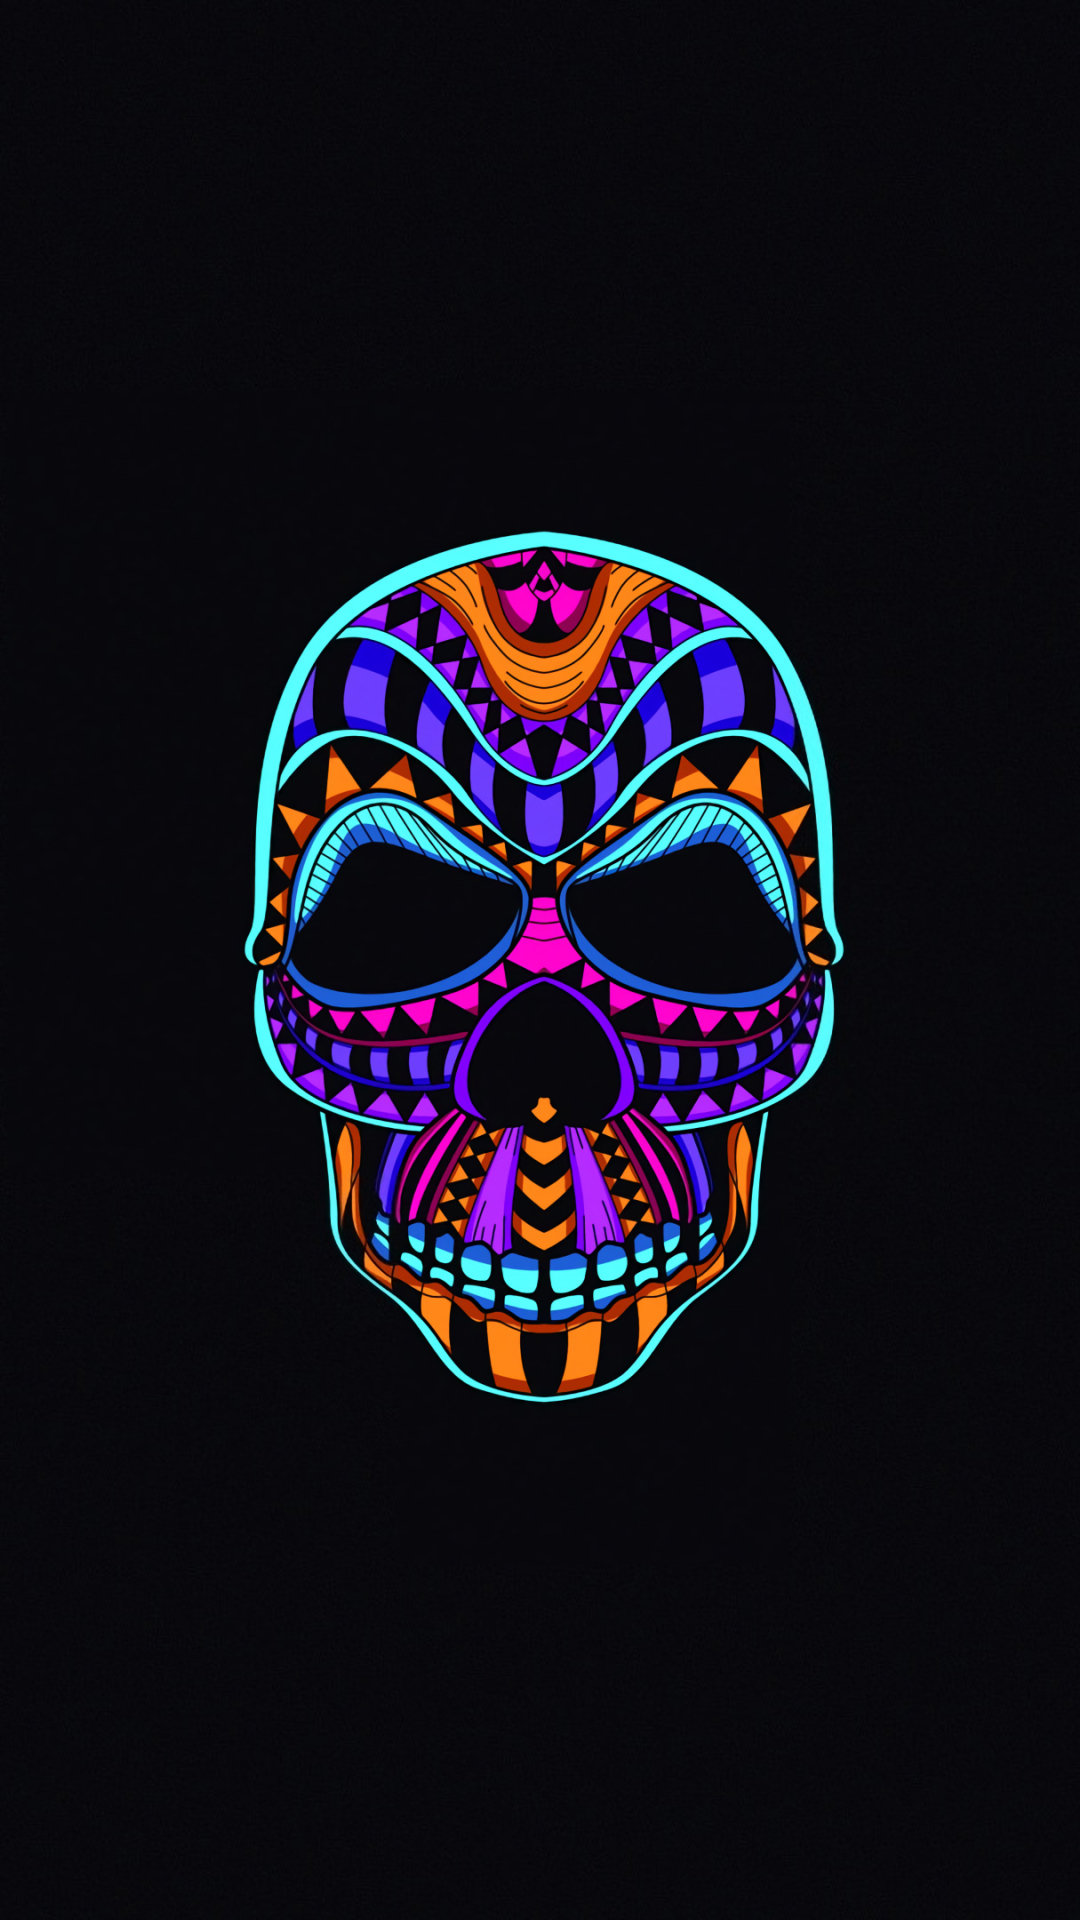 1080x19 Neon Color Minimalist Skull Iphone 7 6s 6 Plus And Pixel Xl One Plus 3 3t 5 Wallpaper Hd Minimalist 4k Wallpapers Images Photos And Background Wallpapers Den